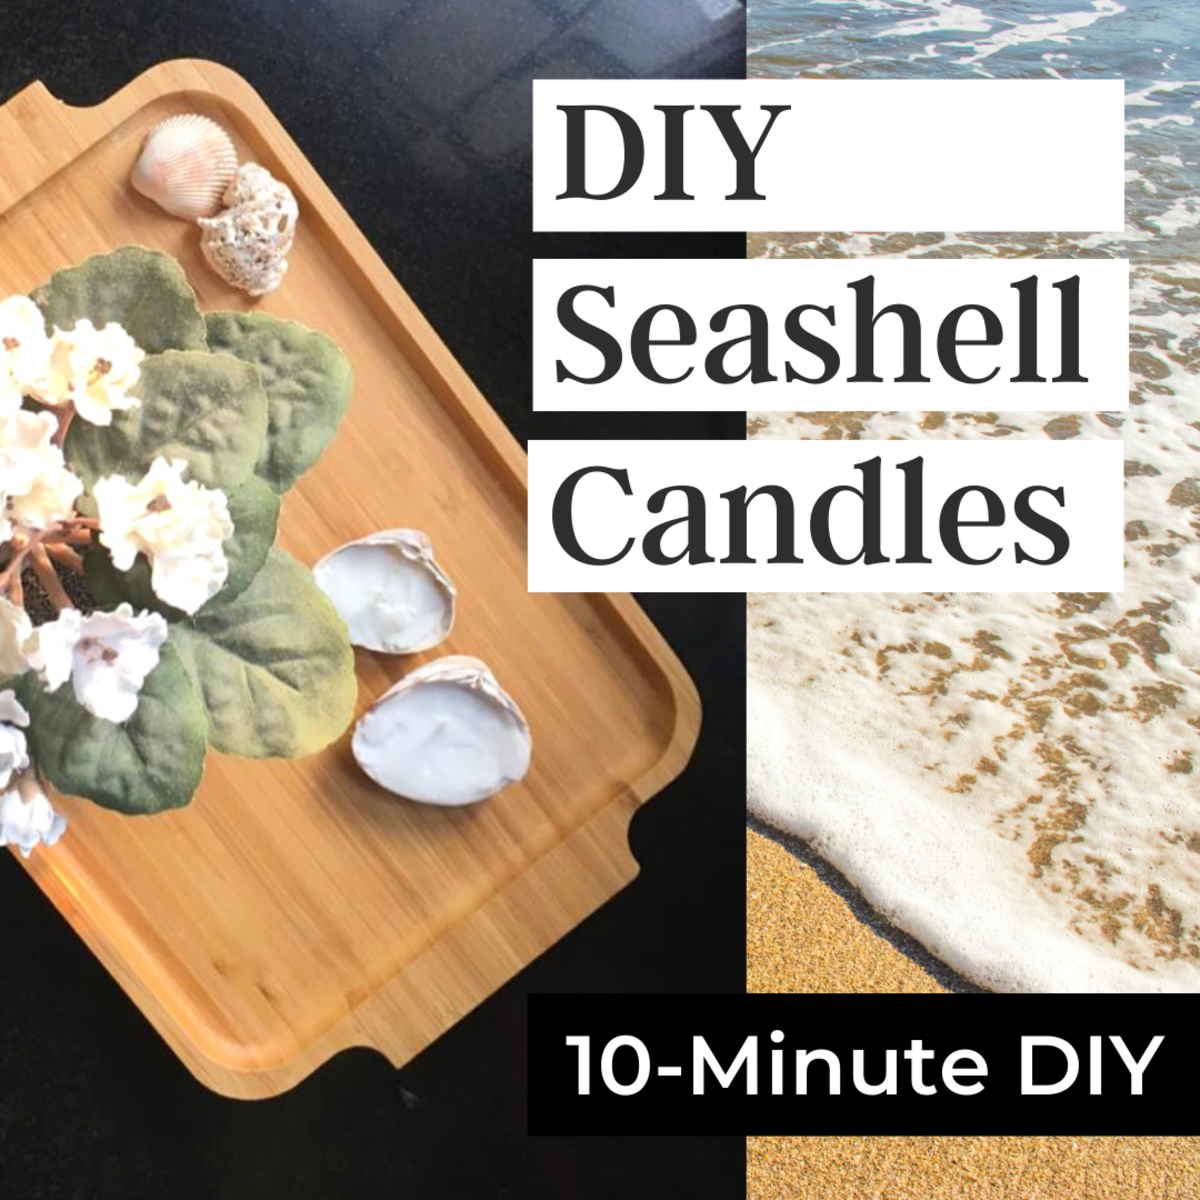 How to Make Seashell Candles (10-Minute DIY Project)